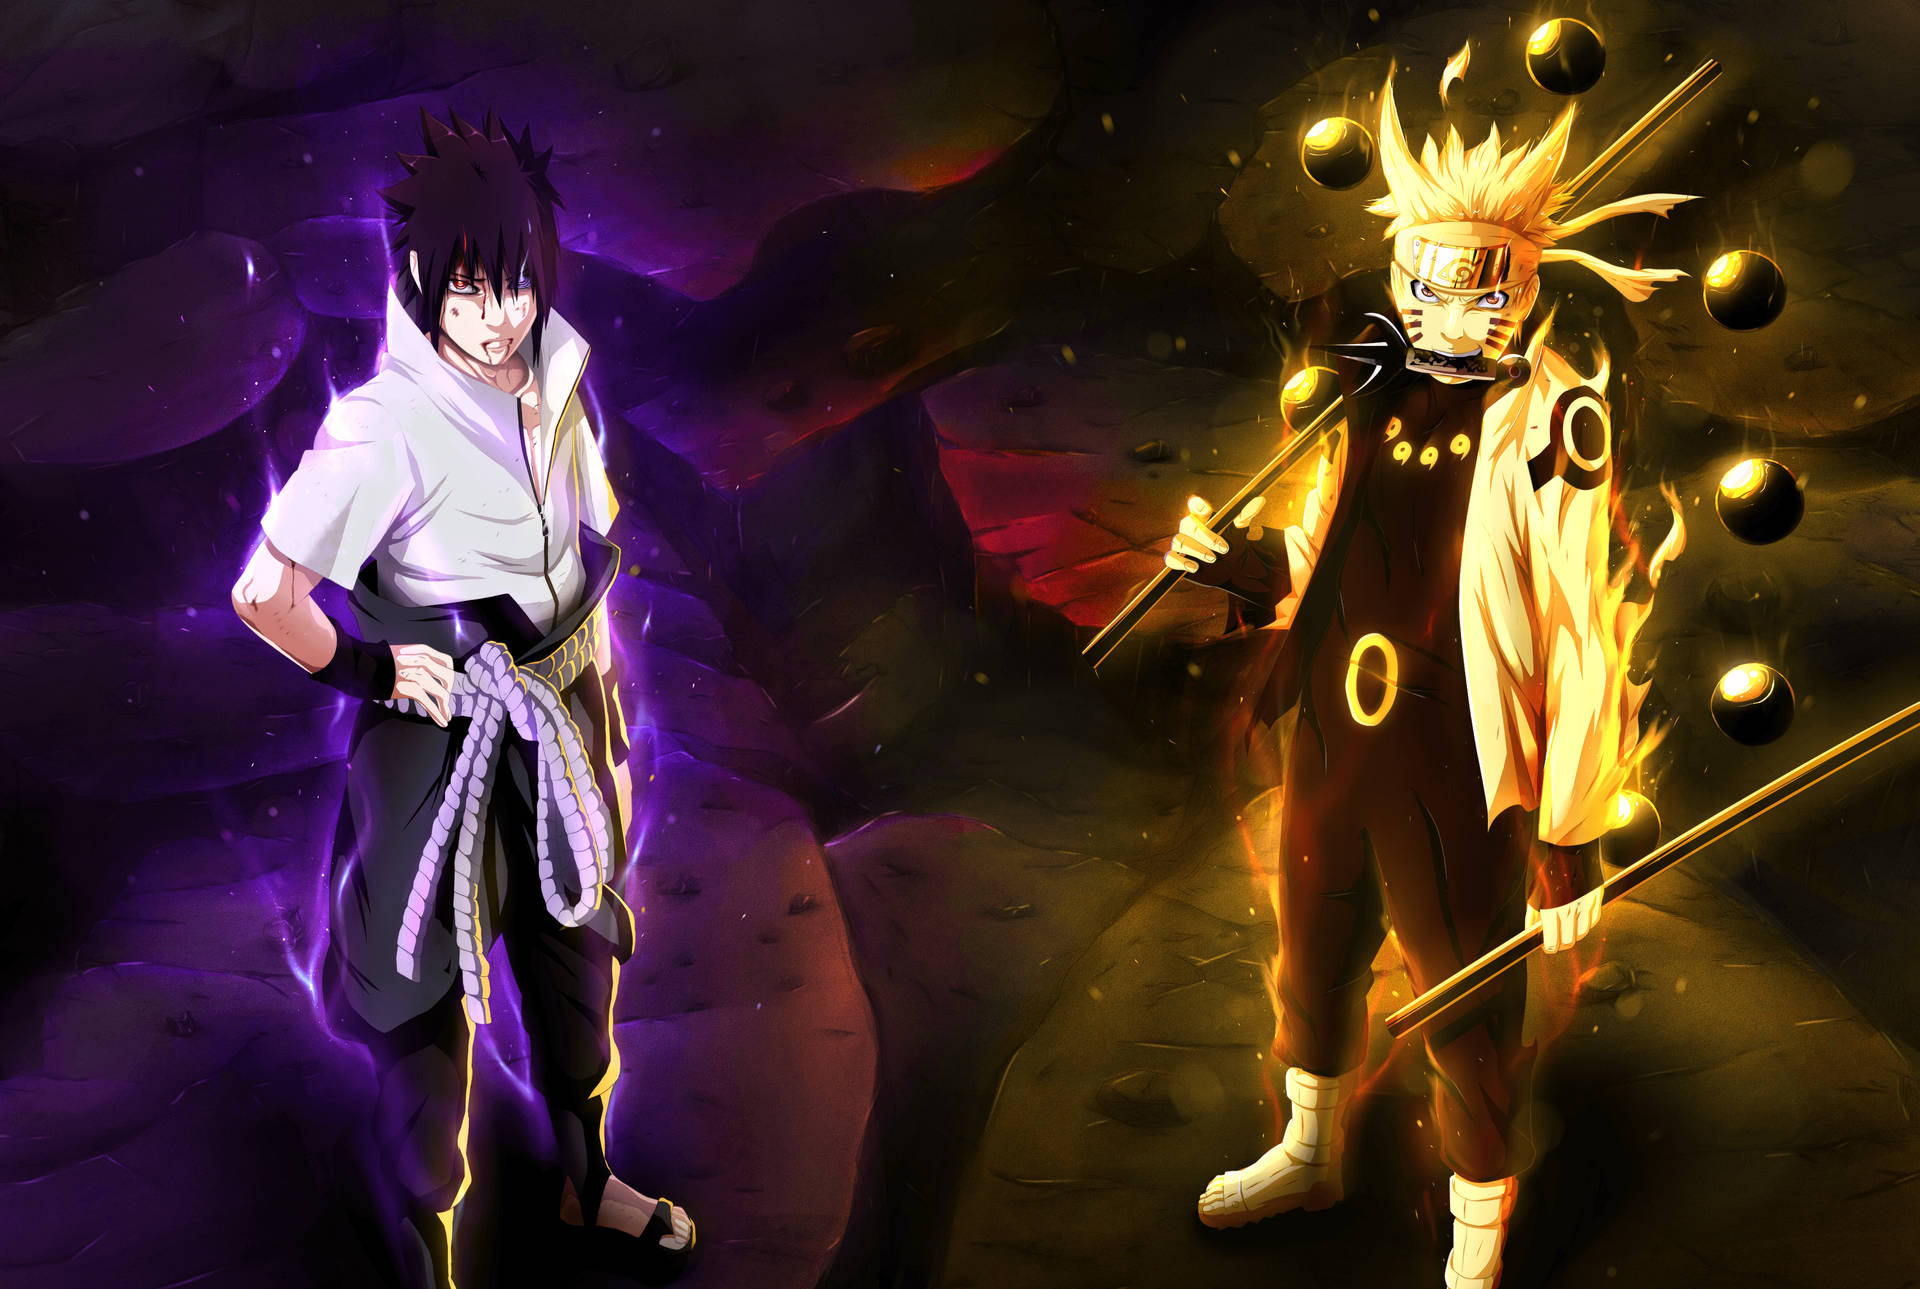 Naruto surrounded by a cosmic flame Wallpaper